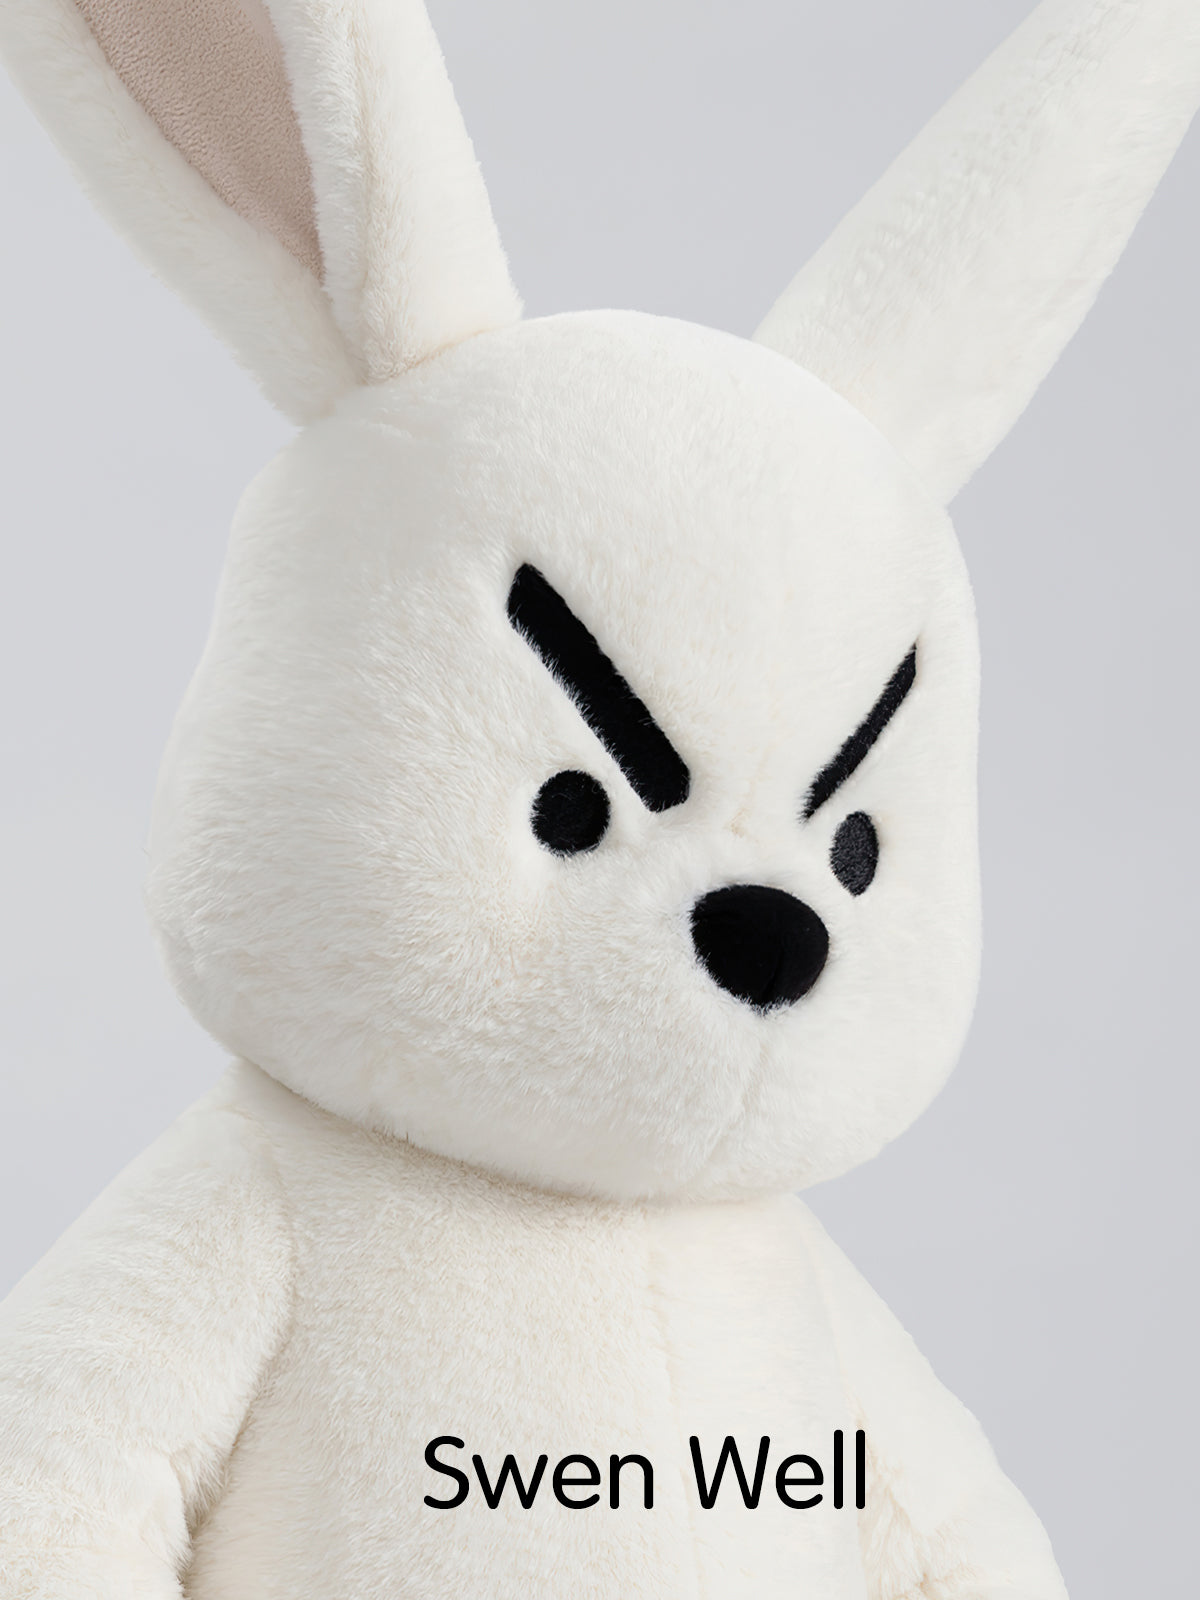 courpal fearless bunny plush angry rabbit stuffed animals 